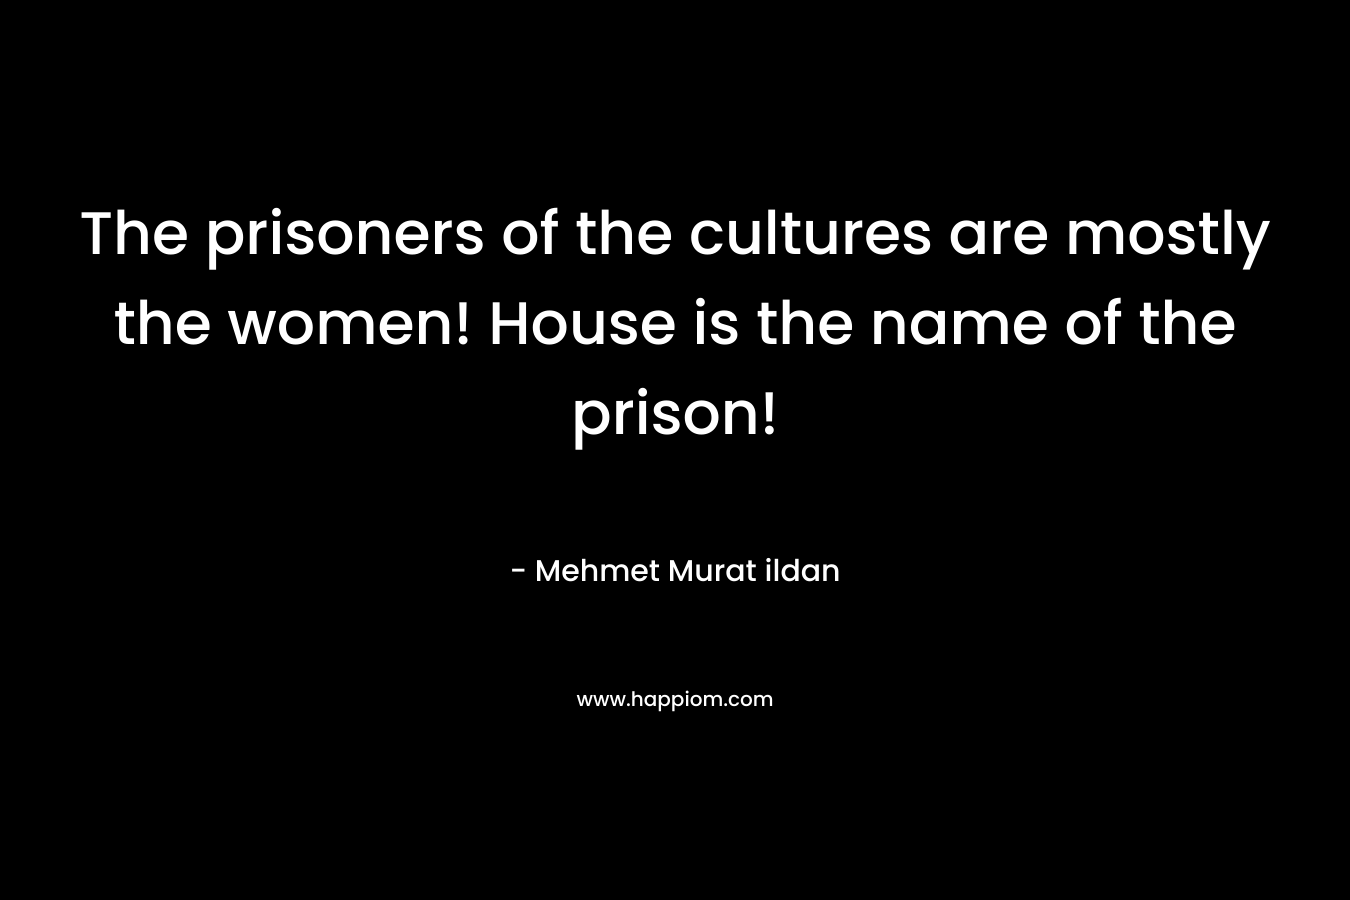 The prisoners of the cultures are mostly the women! House is the name of the prison! – Mehmet Murat ildan